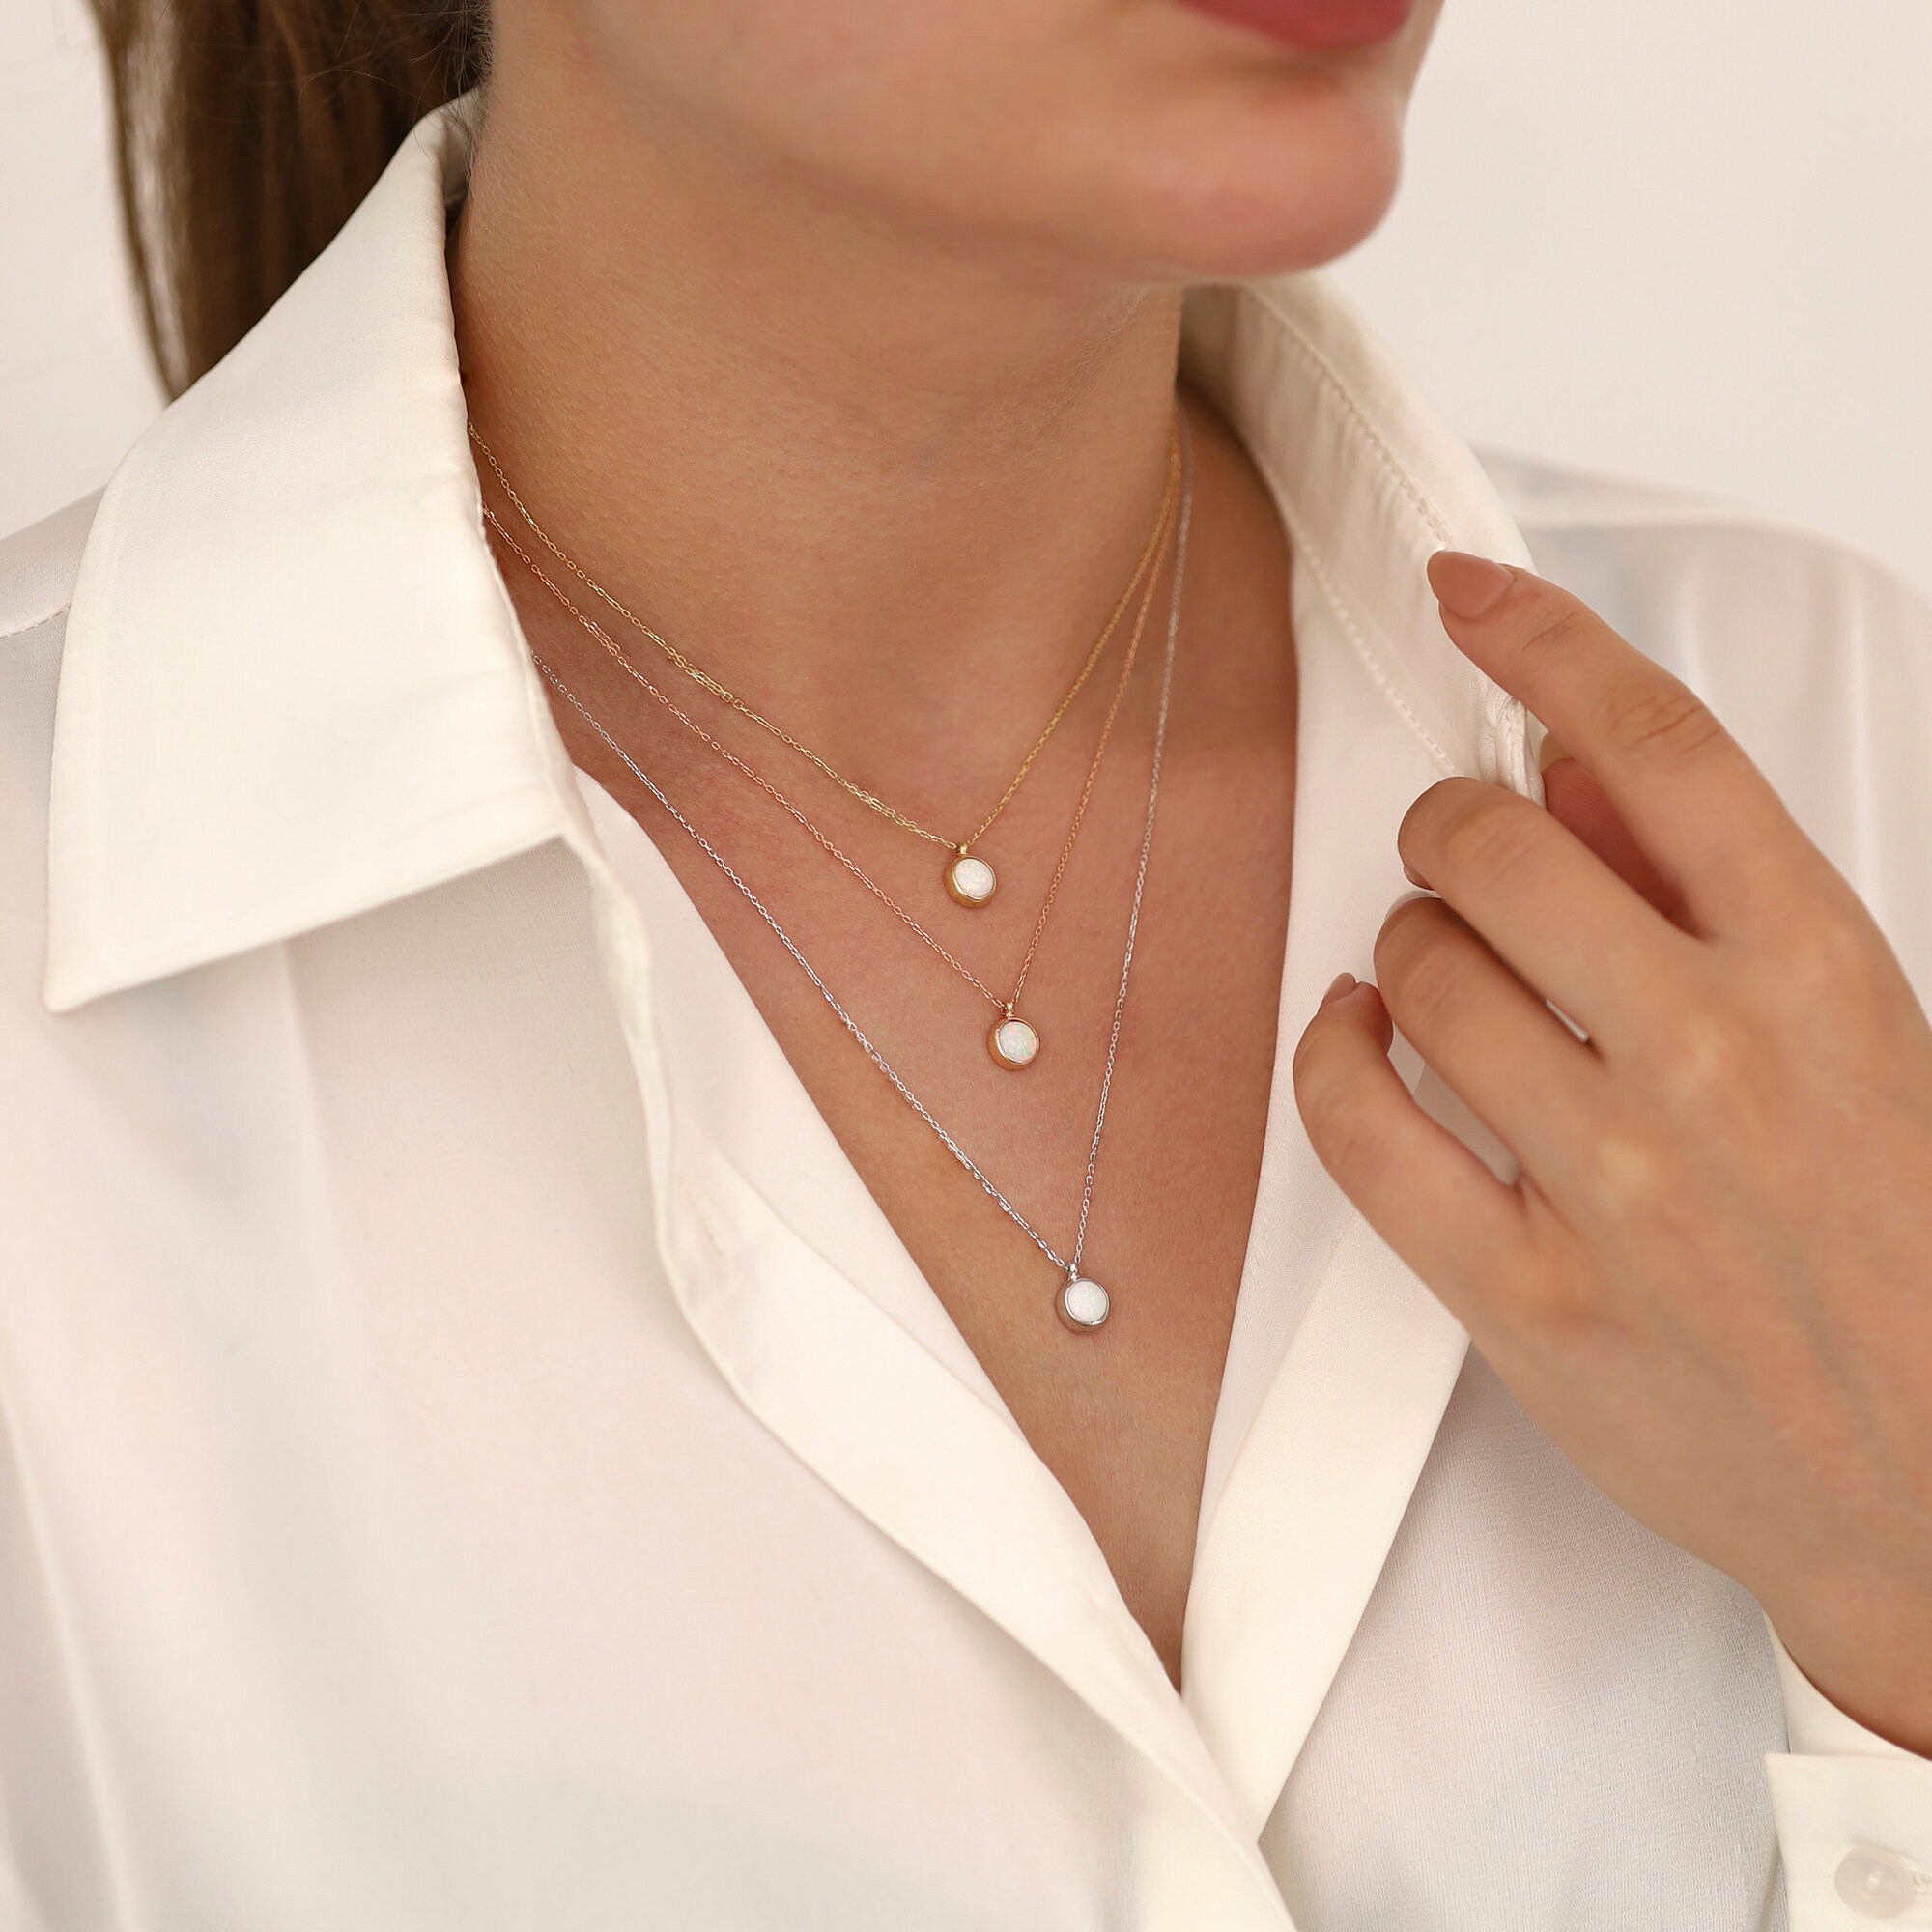 Genuine White Opal Necklace by Bihls Dainty Layering 